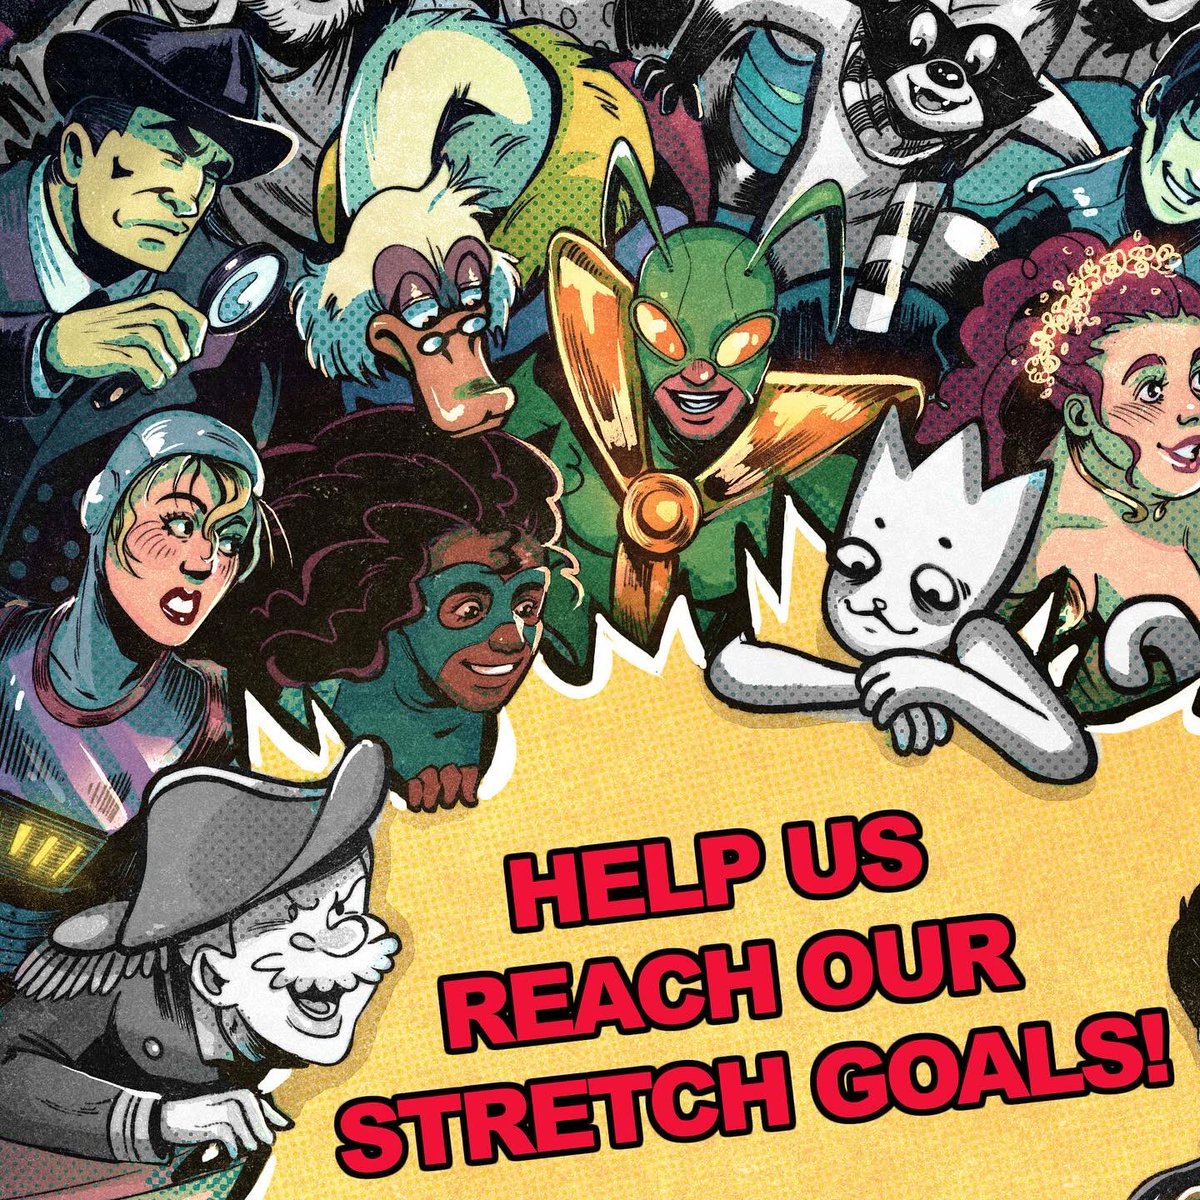 WHOA!!! $7900 is SMASHED!!! We’re so close to crossing over 8k and getting even closer to our stretch goals! COMICS ARE DYING: THE COMIC from @WeAreZoop needs YOU so we can make the best book possible for every supporter!